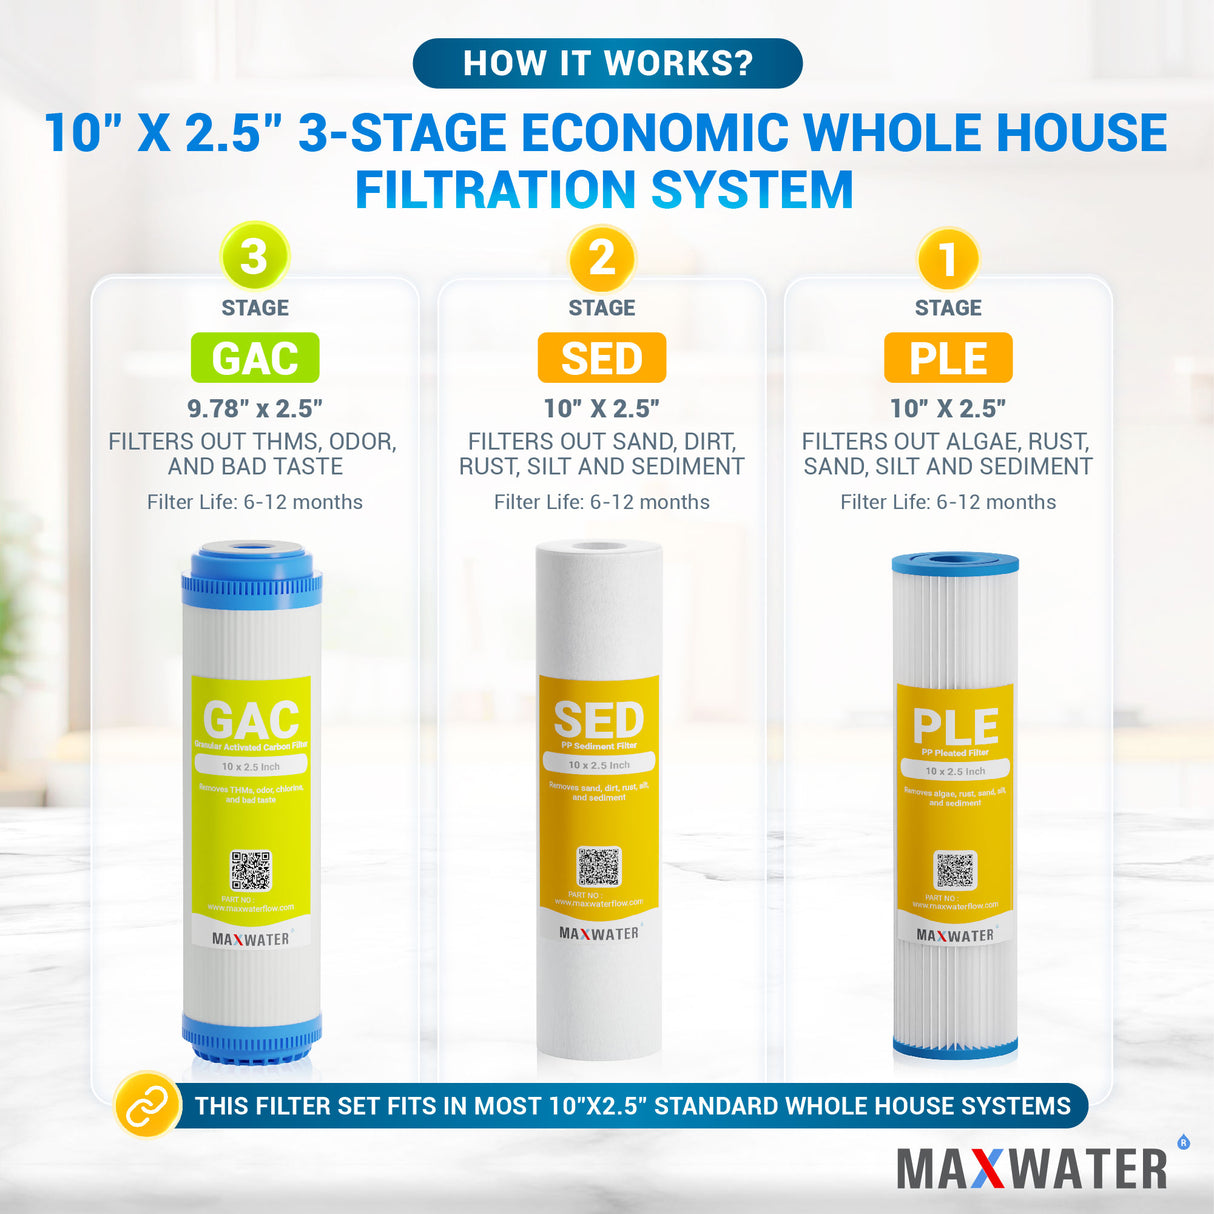 Complete whole house water purification solution ensuring clean water throughout - ideal for home use